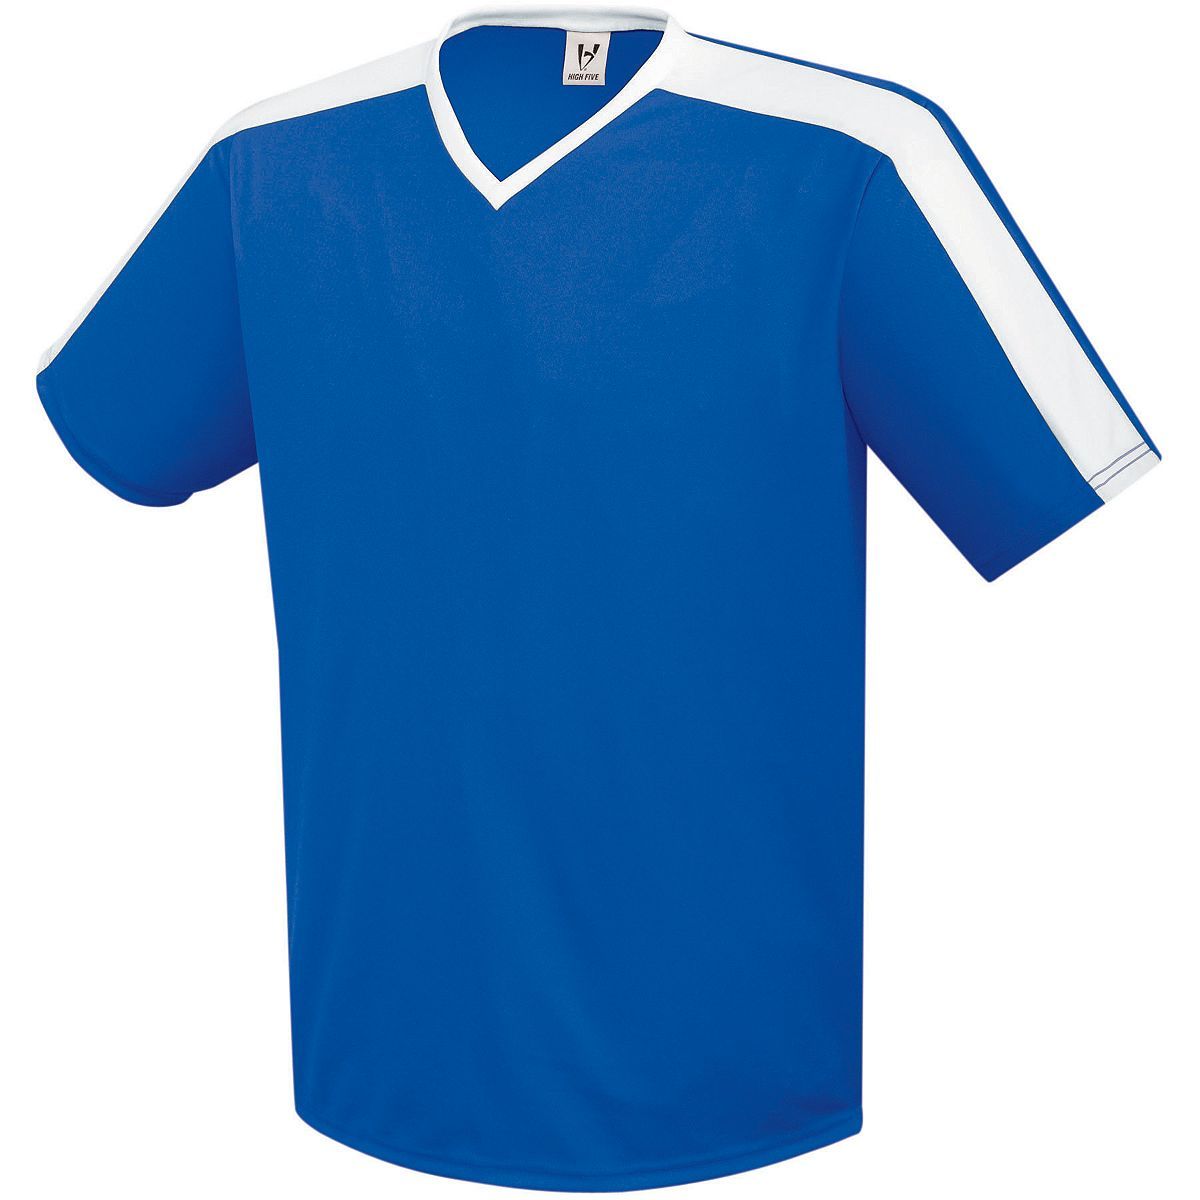 High 5 Youth Genesis Soccer Jersey in Royal/White  -Part of the Youth, Youth-Jersey, High5-Products, Soccer, Shirts, All-Sports-1 product lines at KanaleyCreations.com